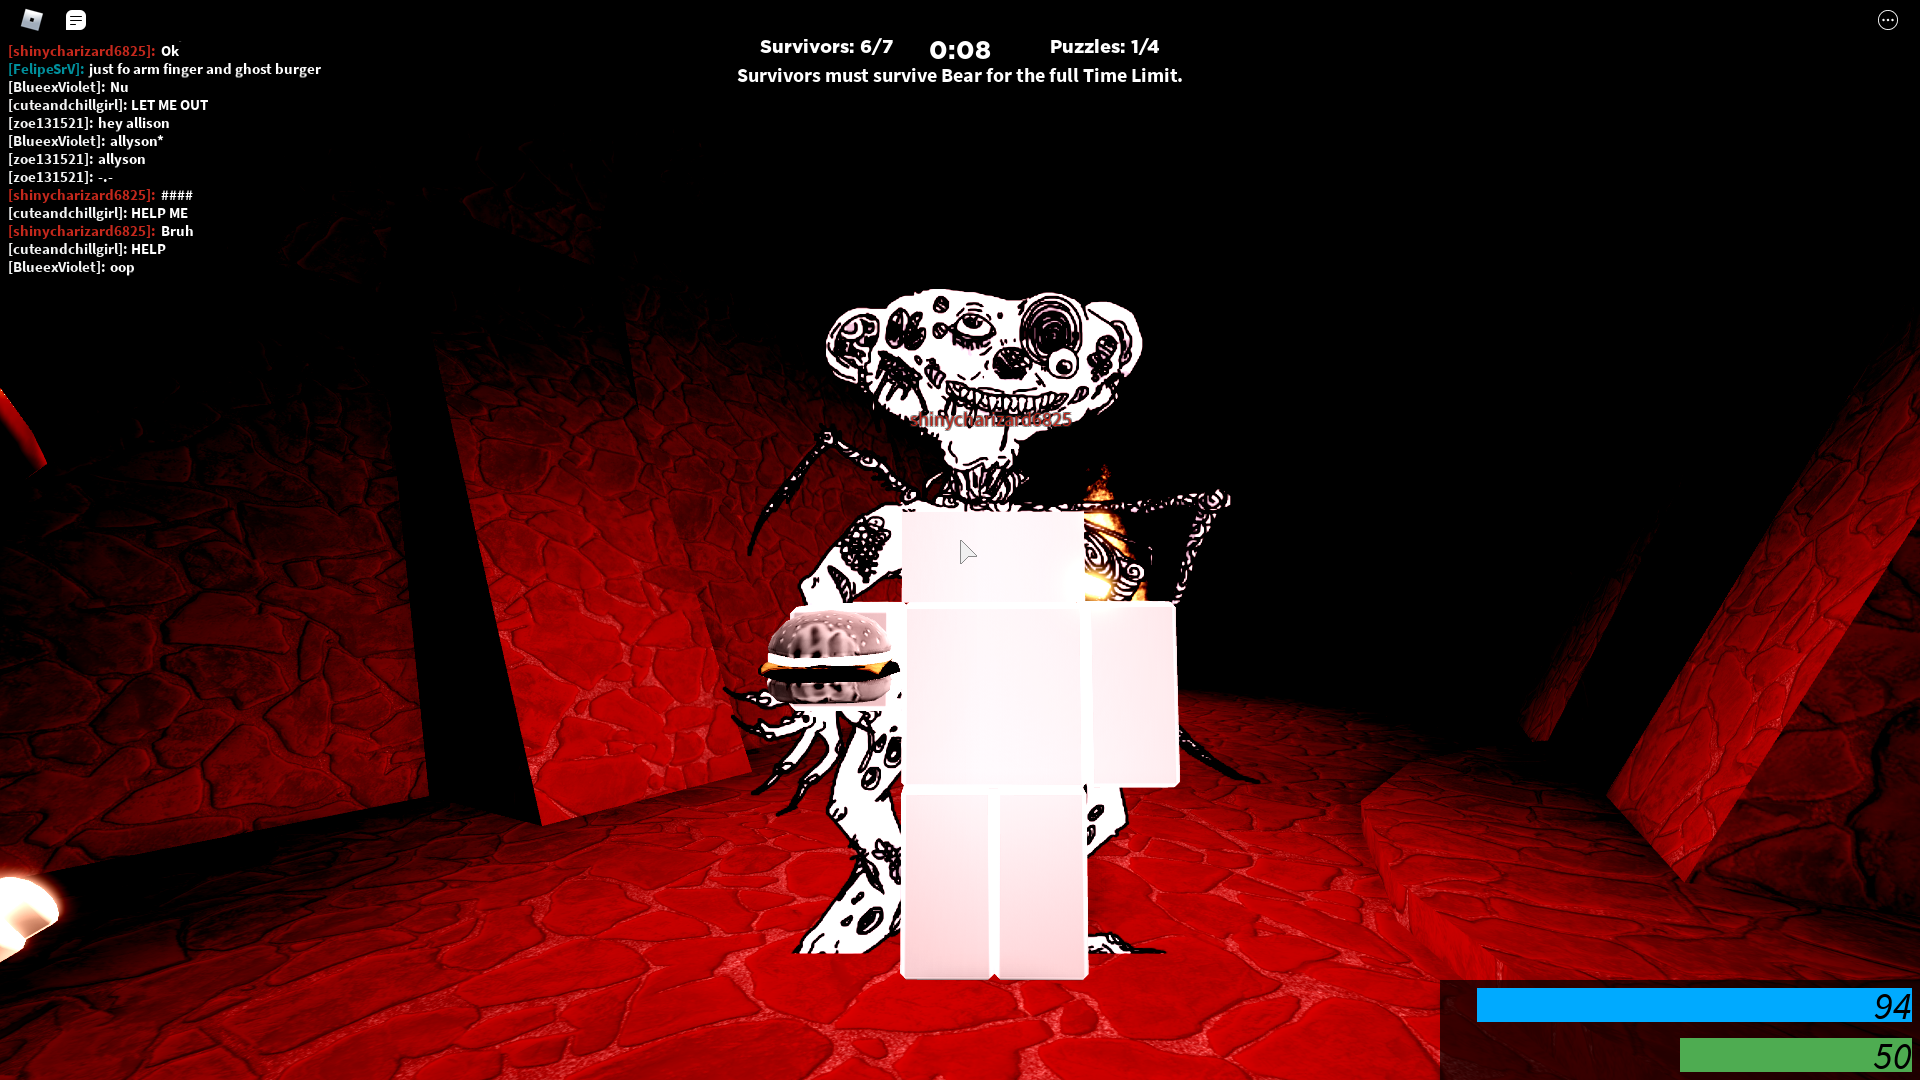 Me And My Friend Did The Ghost Burger Glitch With Ito Fandom - ghost bear roblox